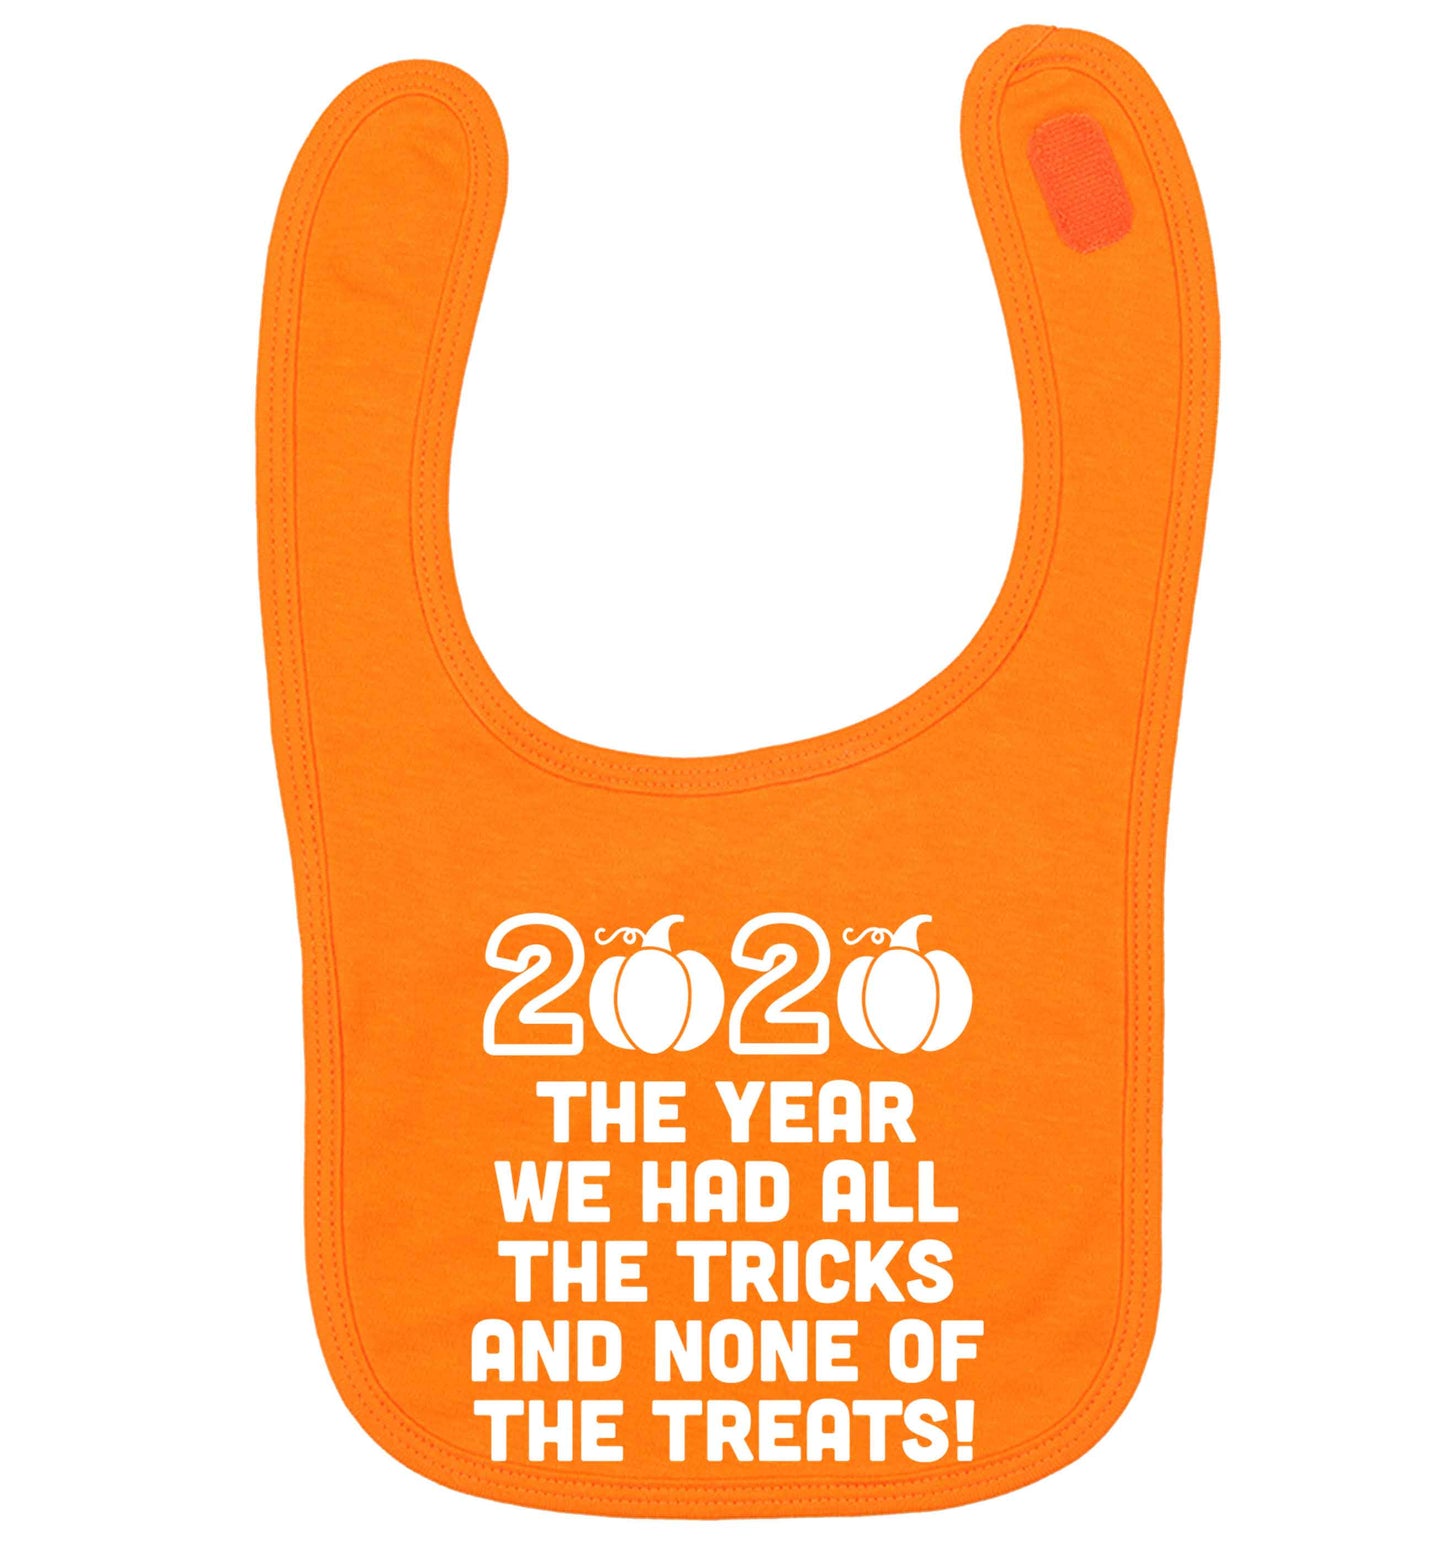 2020 The year we had all of the tricks and none of the treats orange baby bib